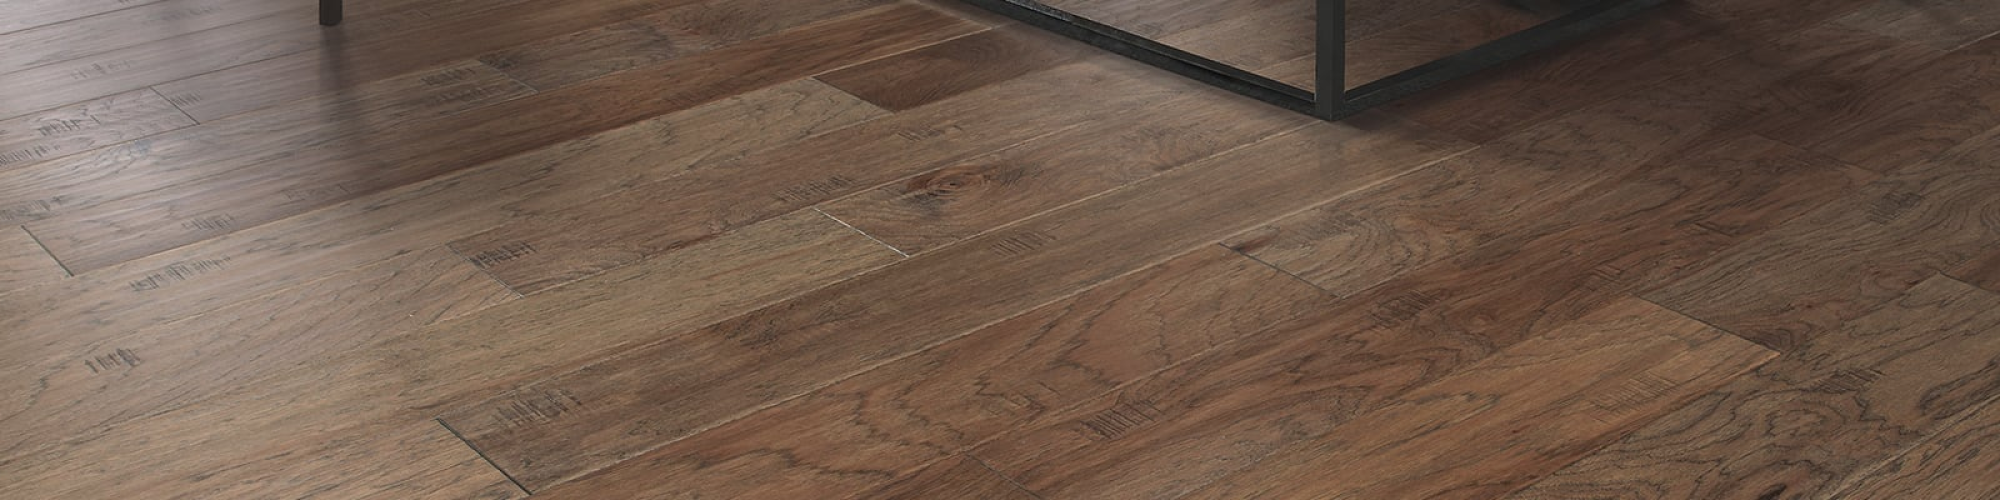 Convenient financing options available* from your local flooring store in New Lenox, IL